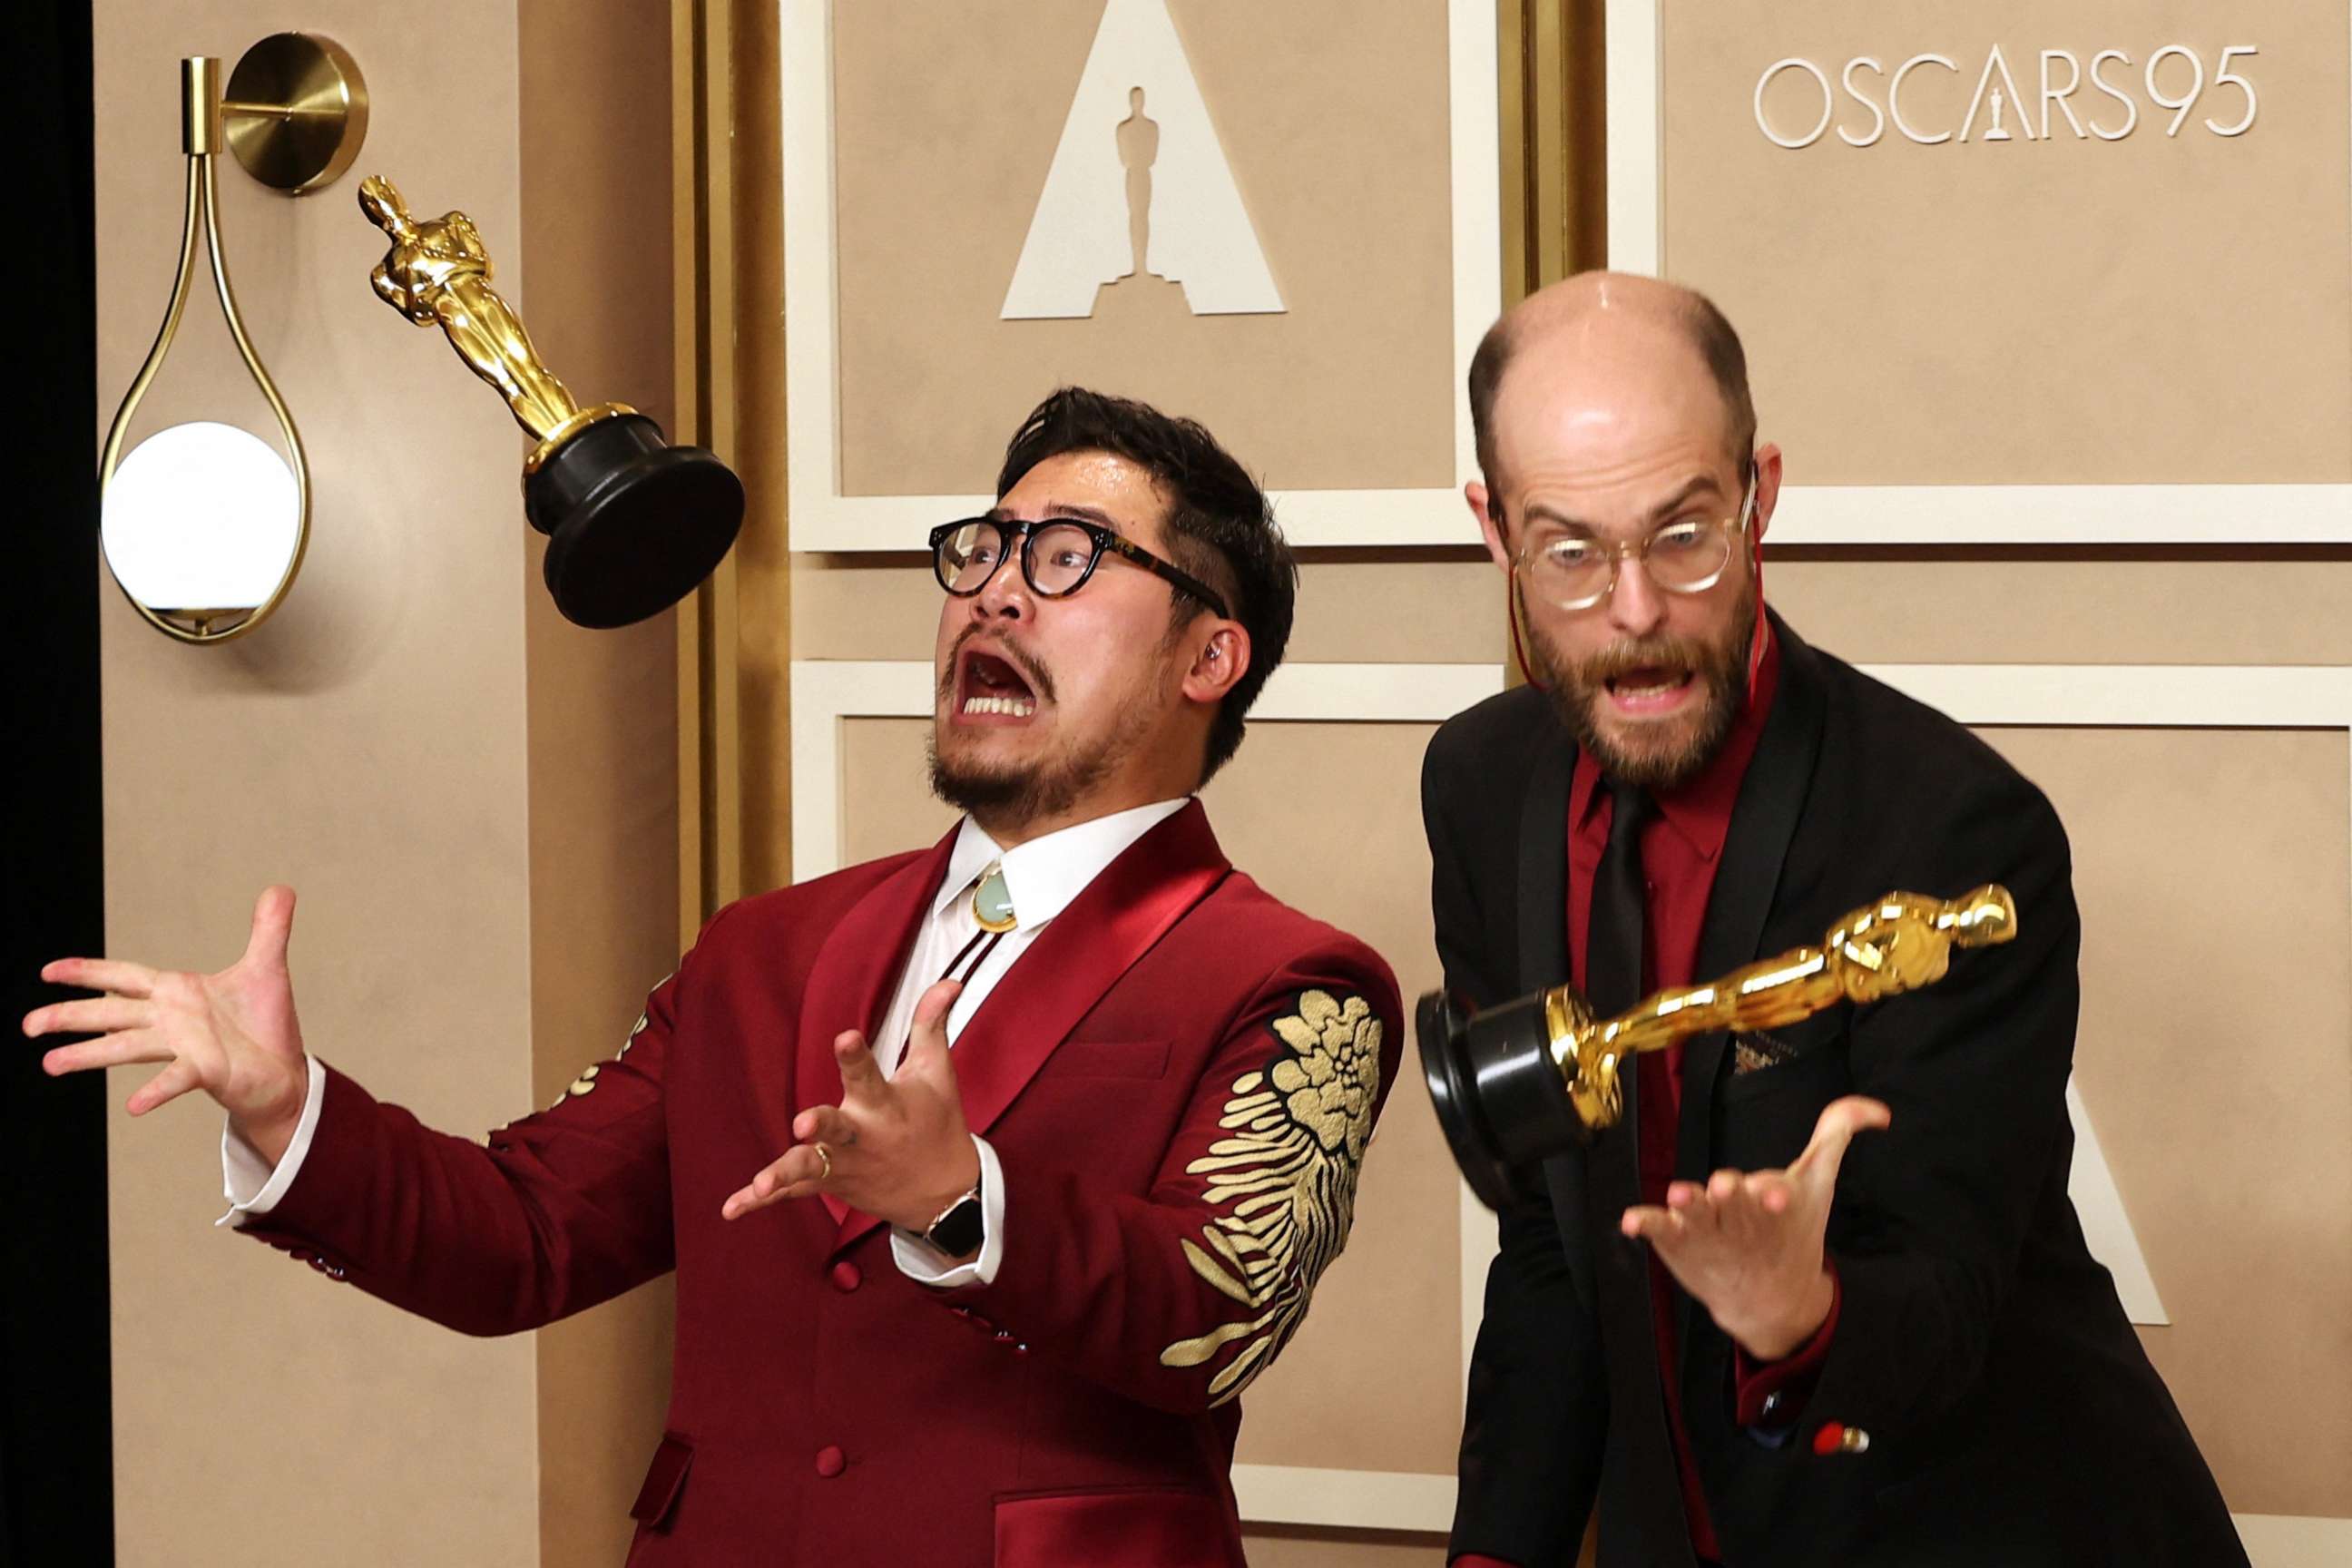 PHOTO: Directors Daniel Kwan and Daniel Scheinert pose with their Oscar for Best Picture for "Everything Everywhere All at Once" at the 95th Academy Awards in Hollywood, Mar. 12, 2023.